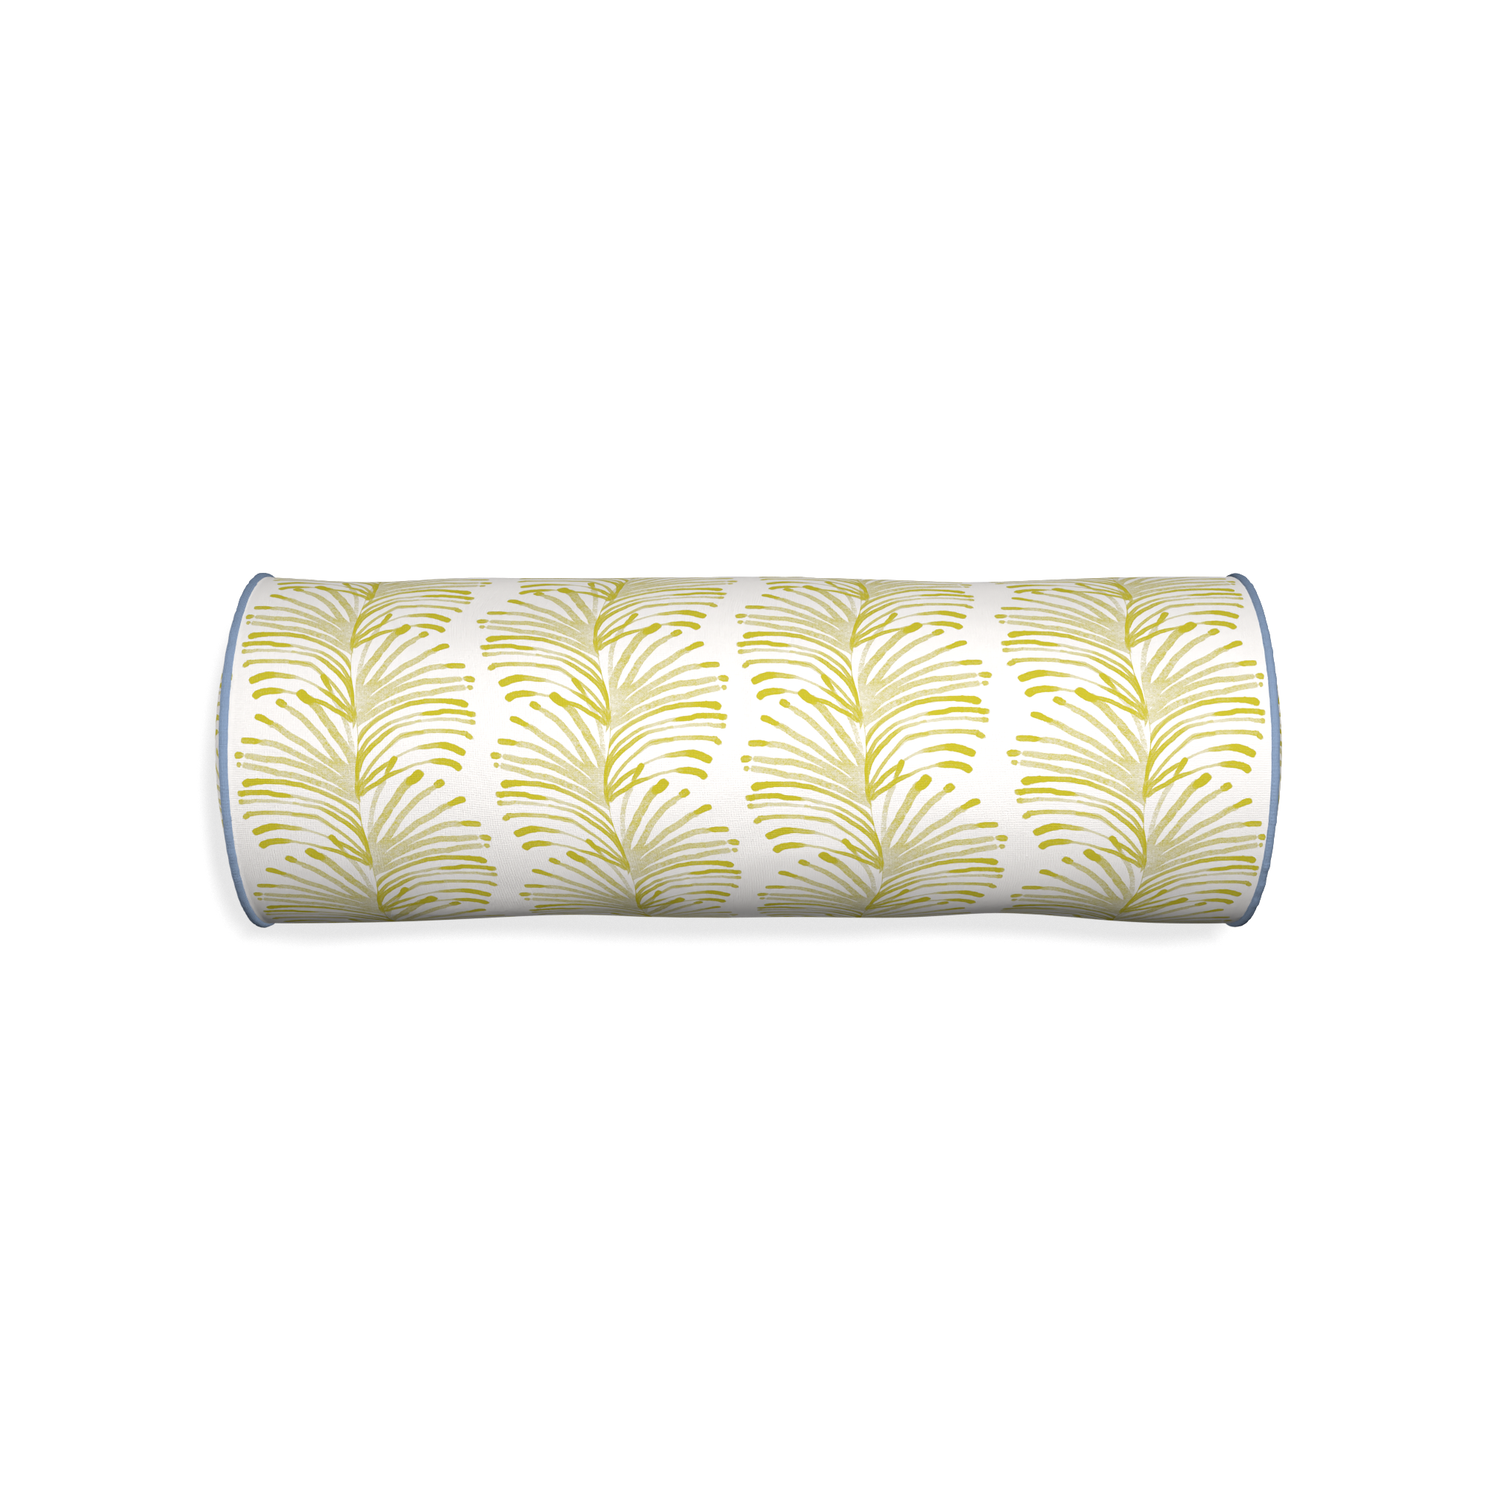 Bolster emma chartreuse custom yellow stripe chartreusepillow with sky piping on white background